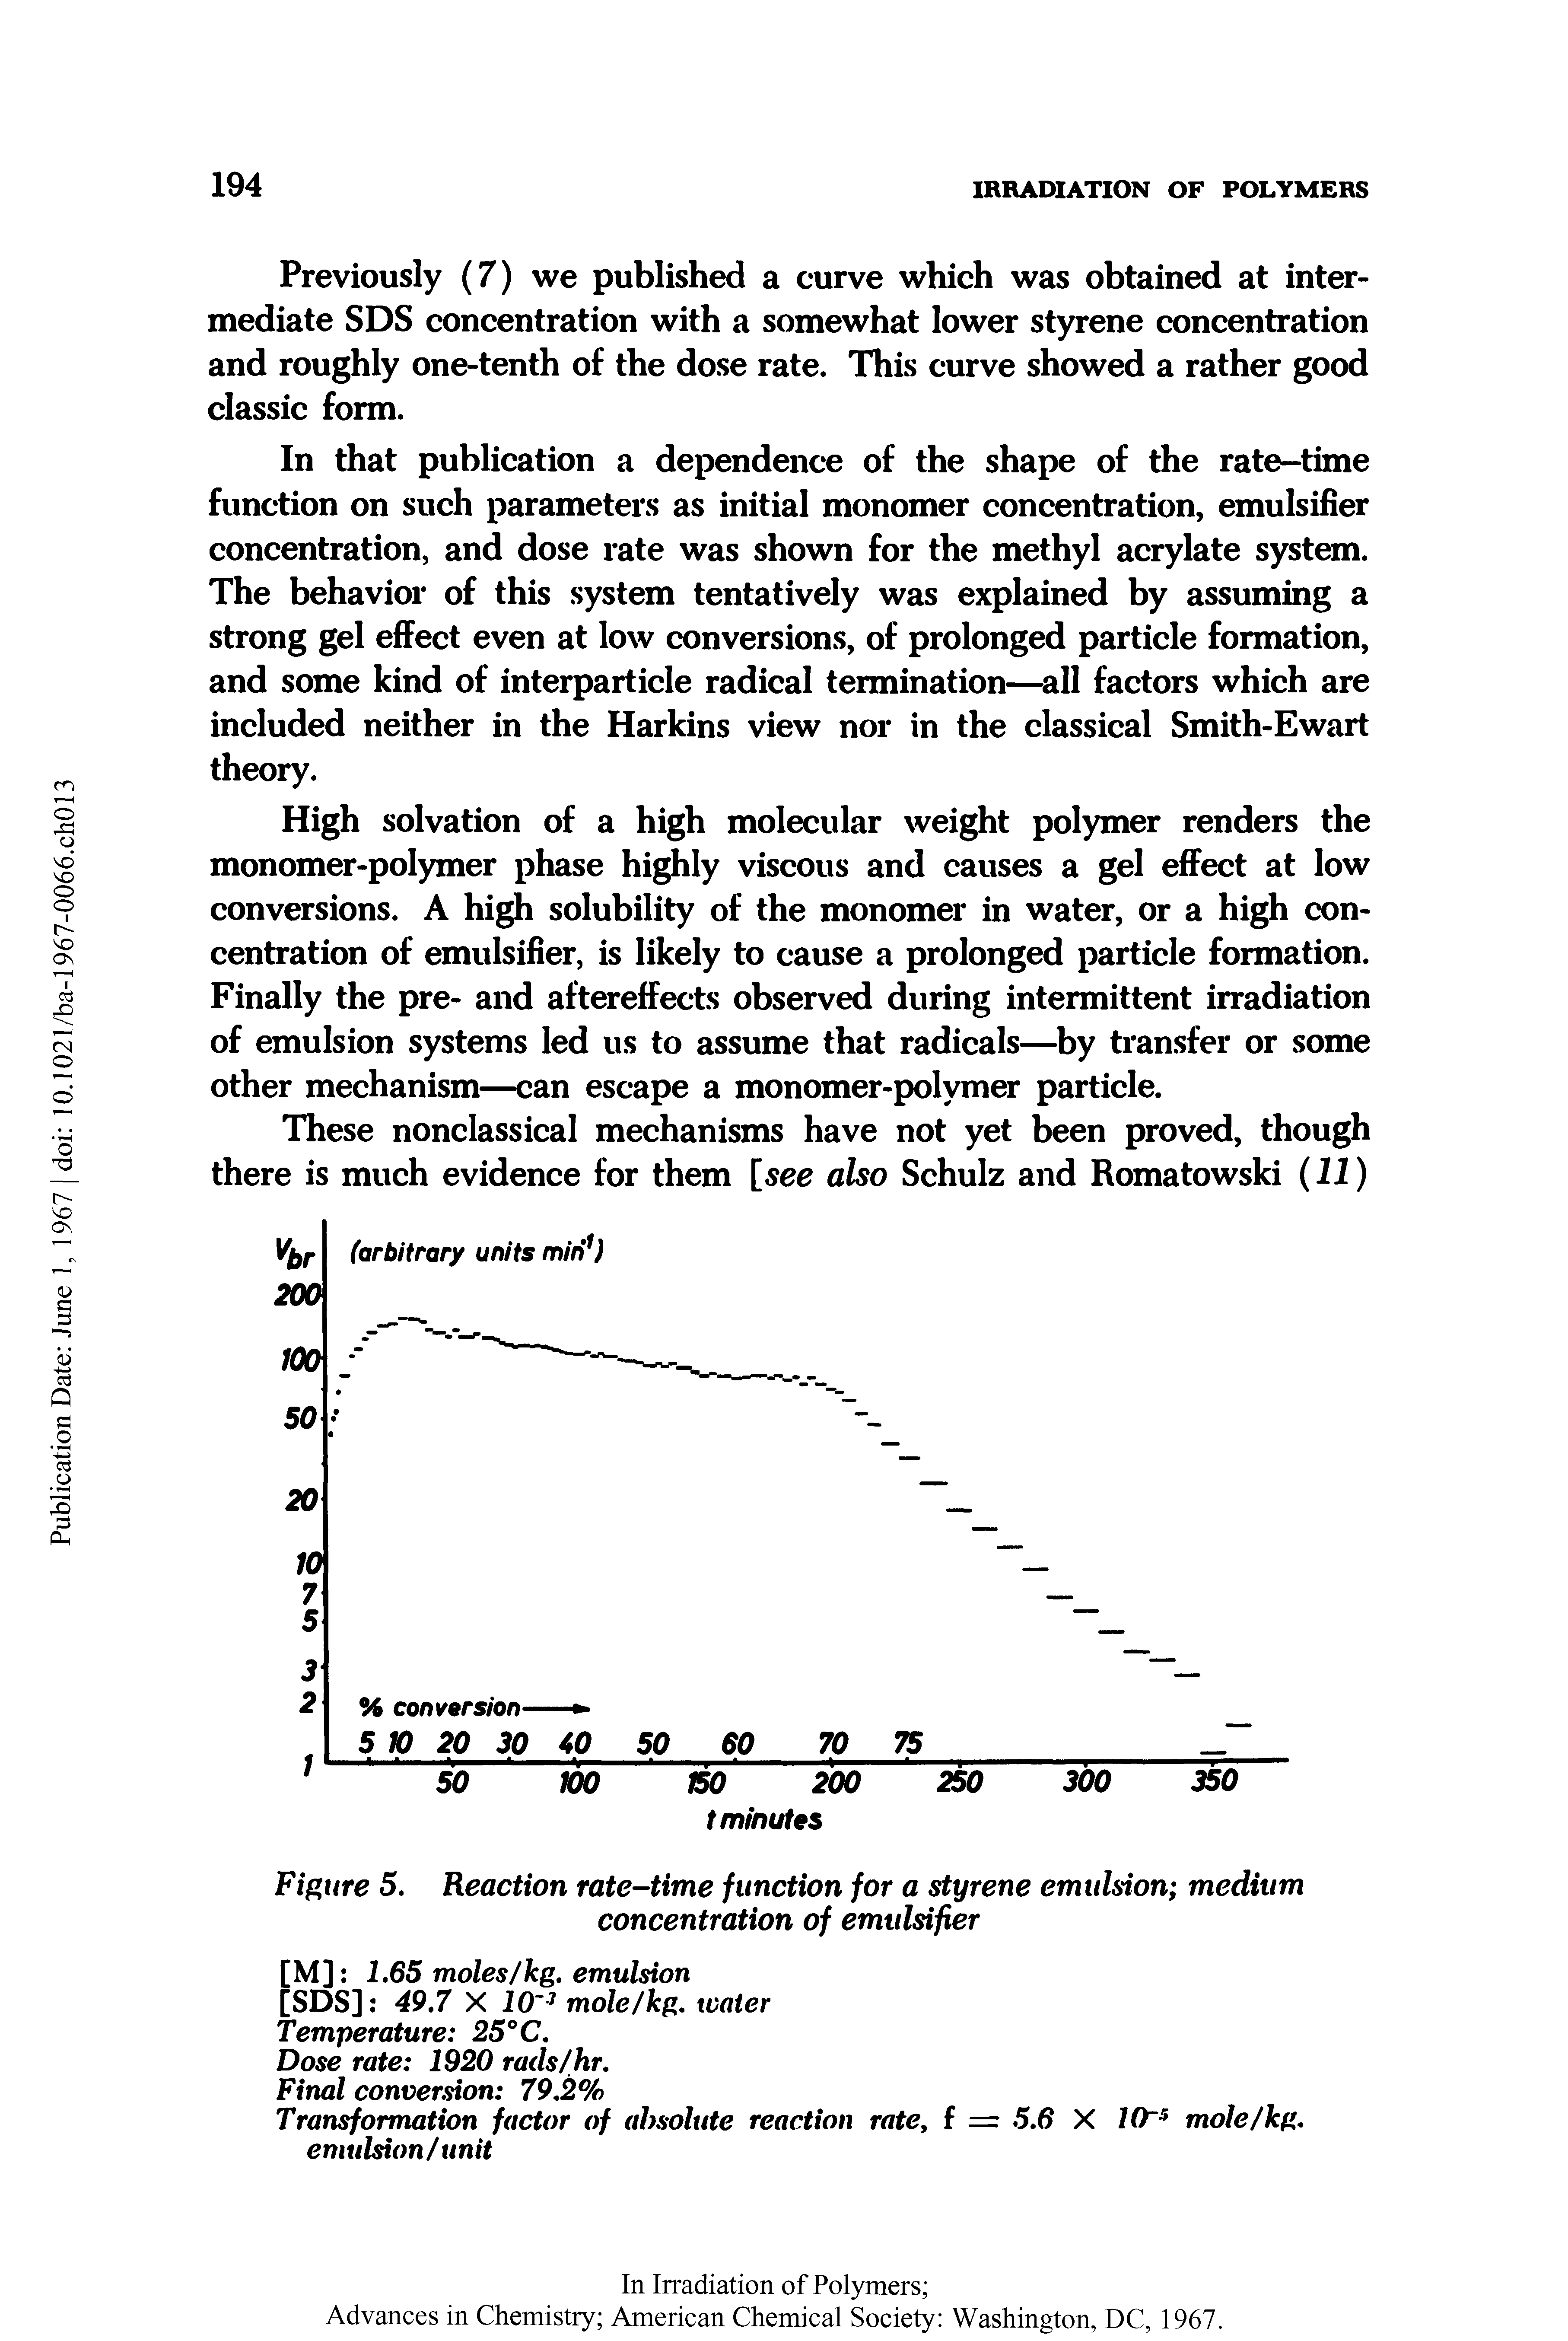 Figure 5. Reaction rate-time function for a styrene emulsion medium concentration of emulsifier...